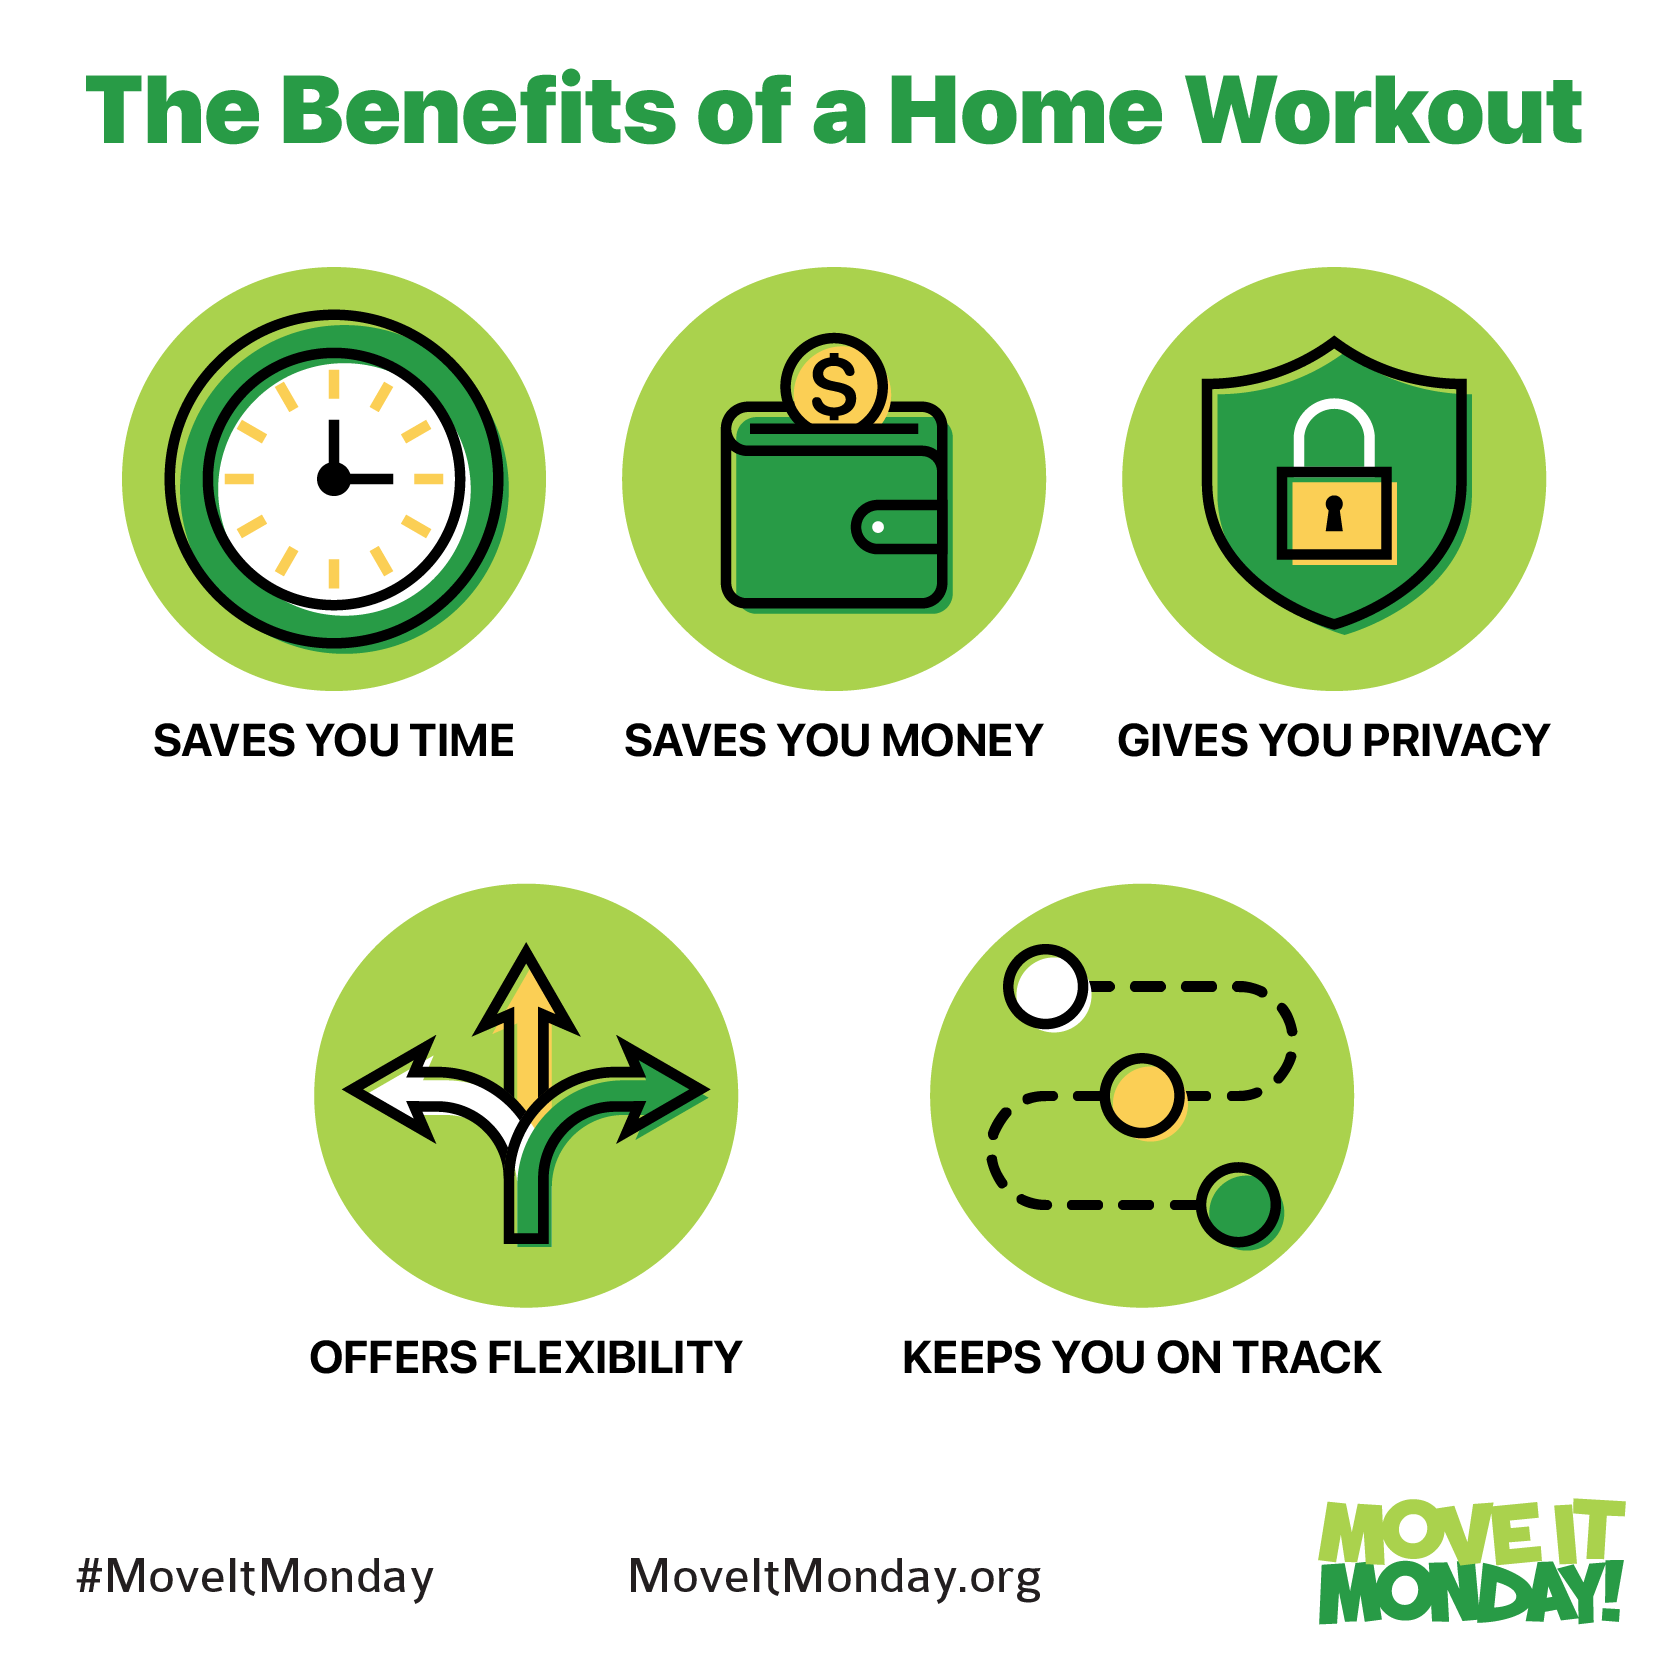 The Benefits of a Home Workout: Saves you time, saves you money, gives you privacy, offers flexibility, keeps you on track